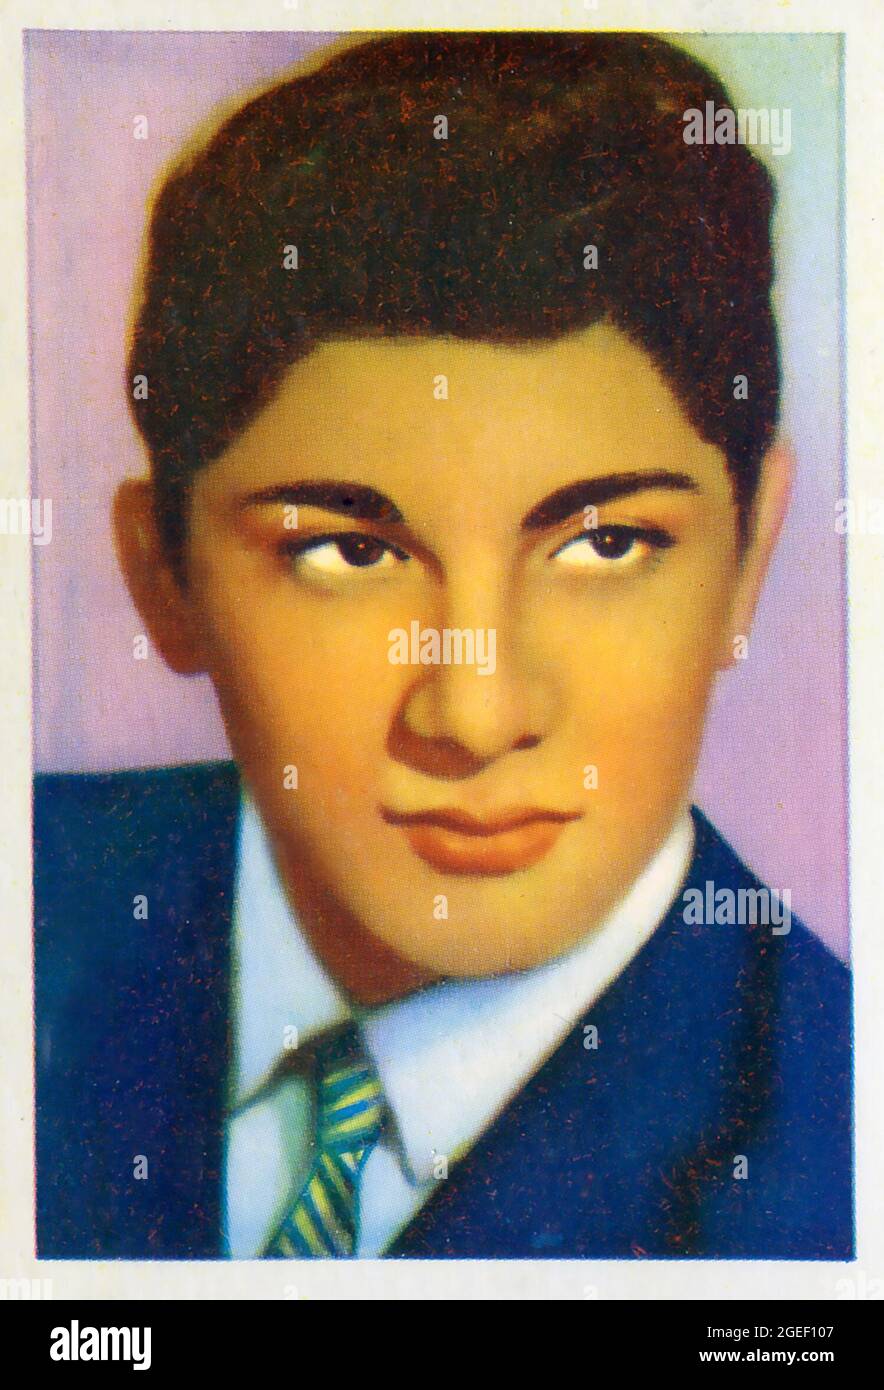 1960s era trading card depicting Paul Anka from a set titled disc Stars was published by Kane Products Ltd. of sussex, England. Stock Photo